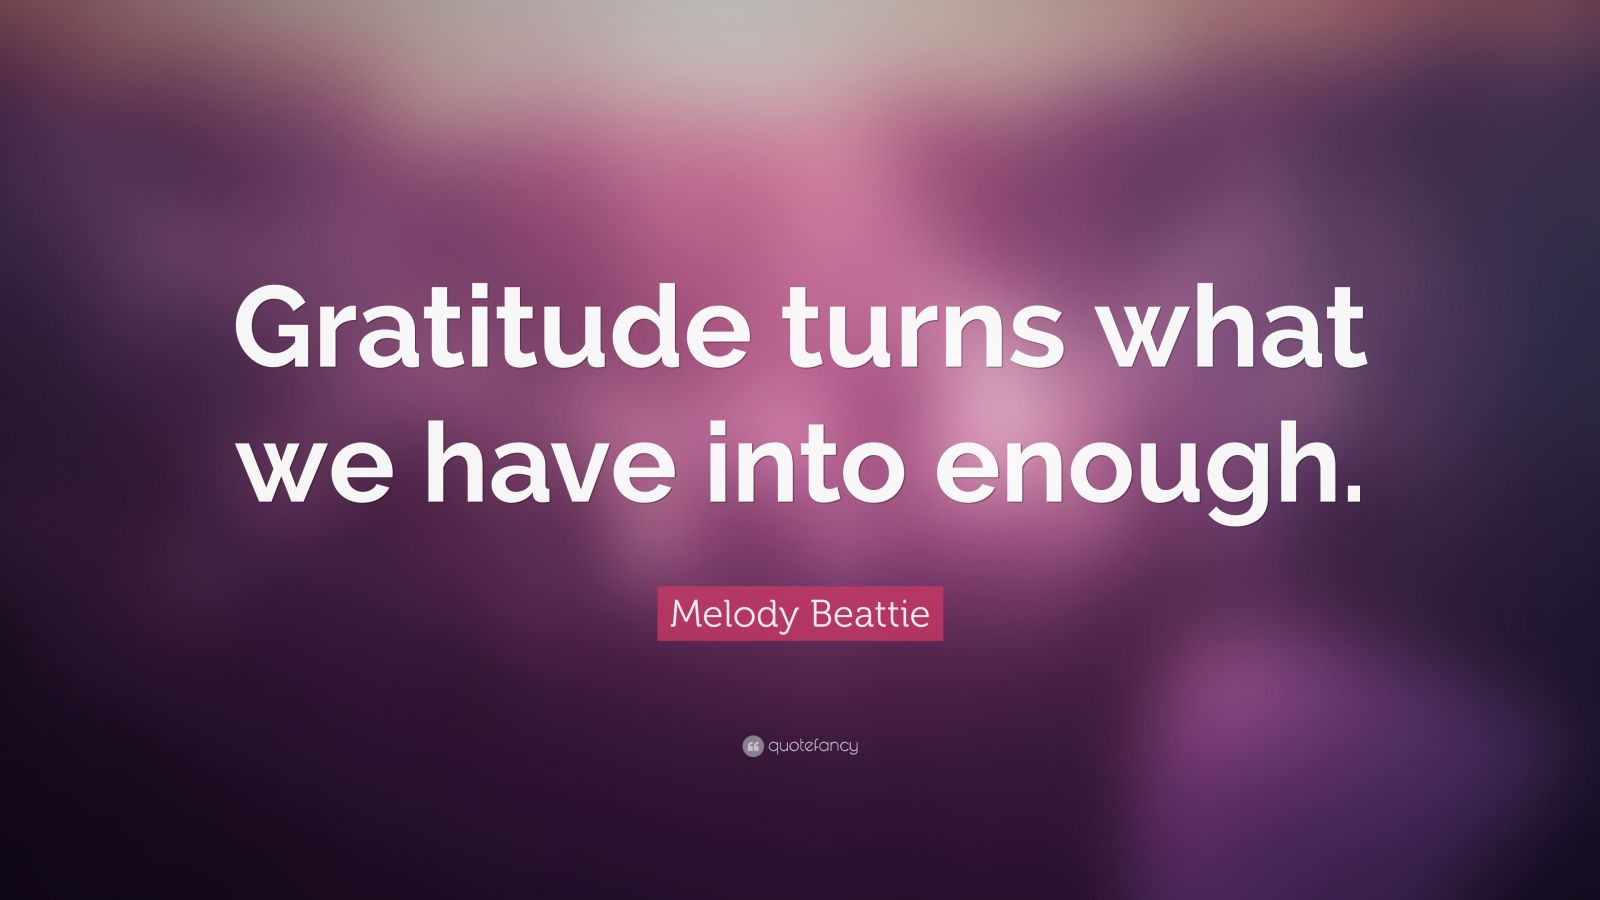 Melody Beattie Quote: “Gratitude turns what we have into enough.” (12 ...